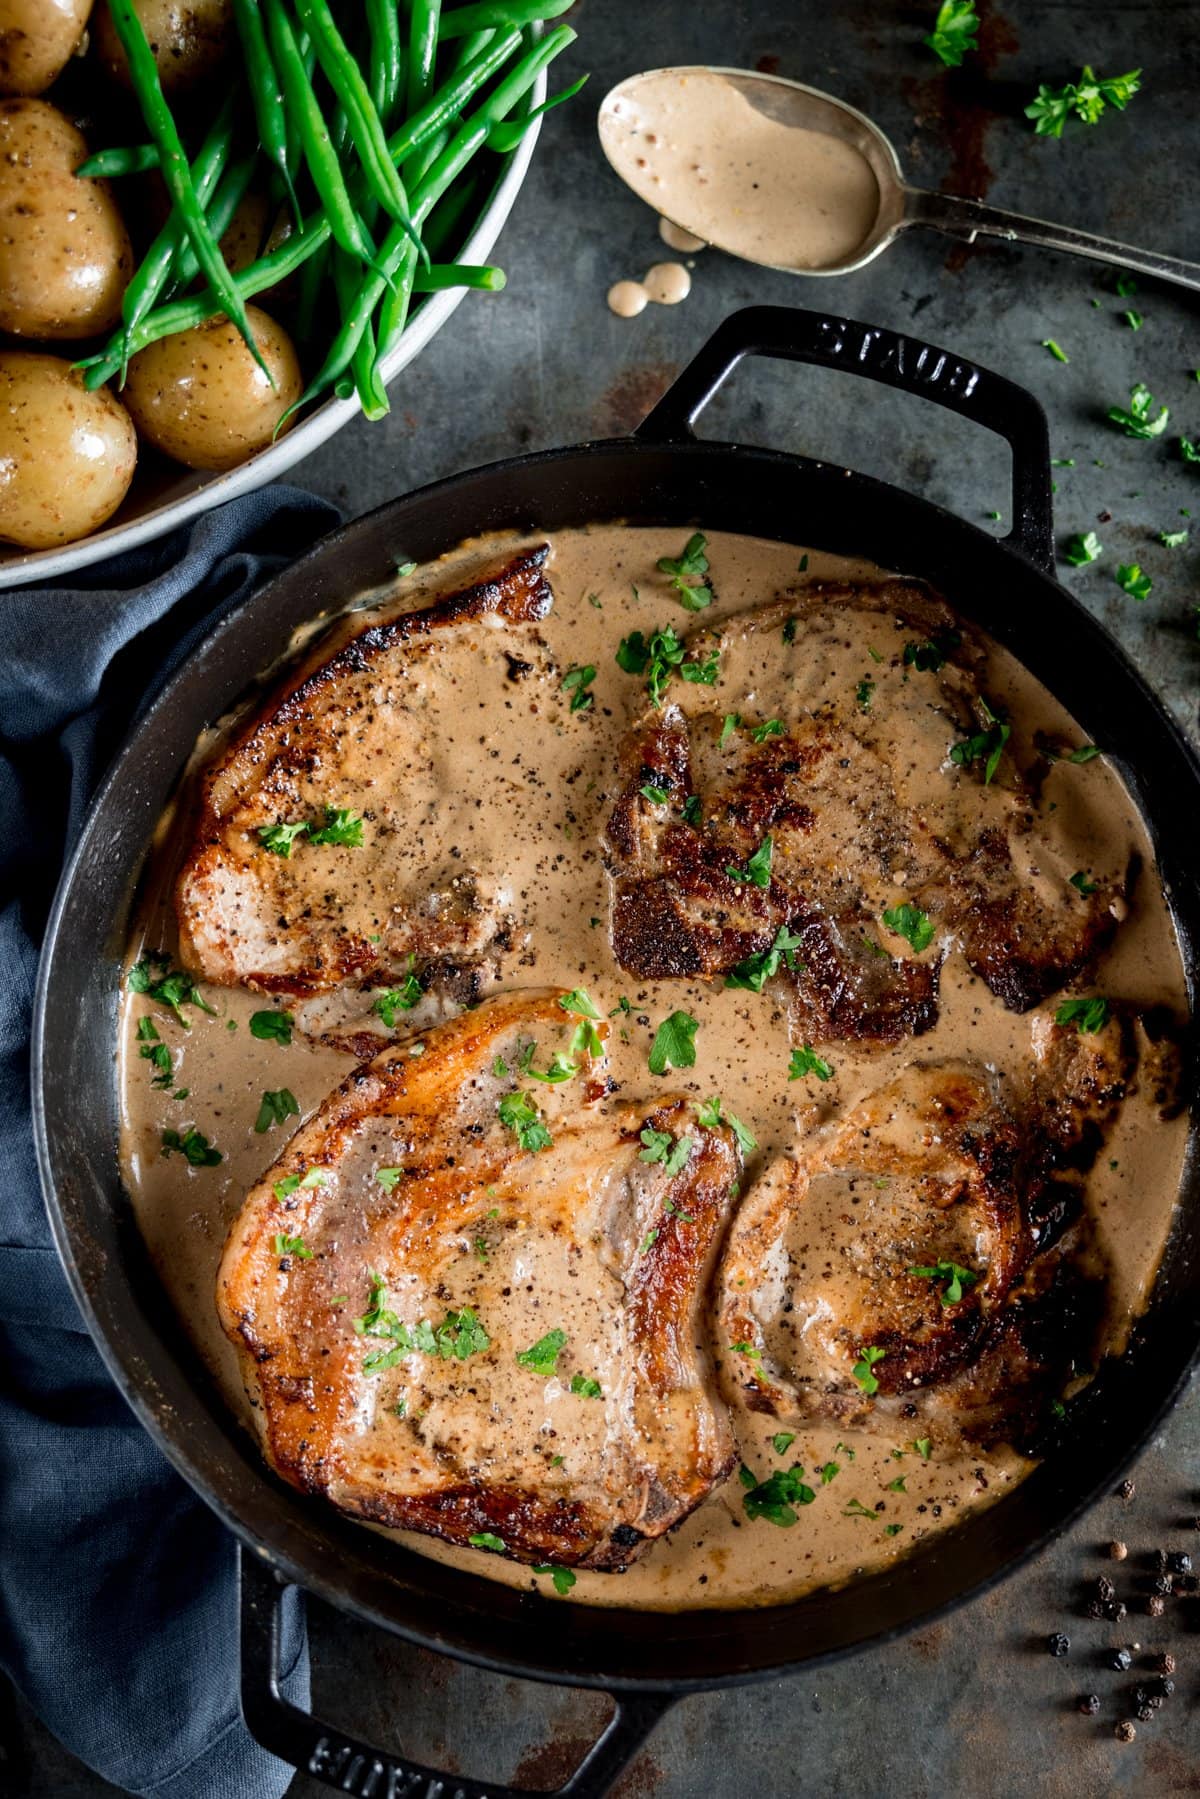 A photo looking down on a big pan of pork chops with creamy mustard sauce, and a bowl of baby new potatoes and green beans on the side, on a grey table